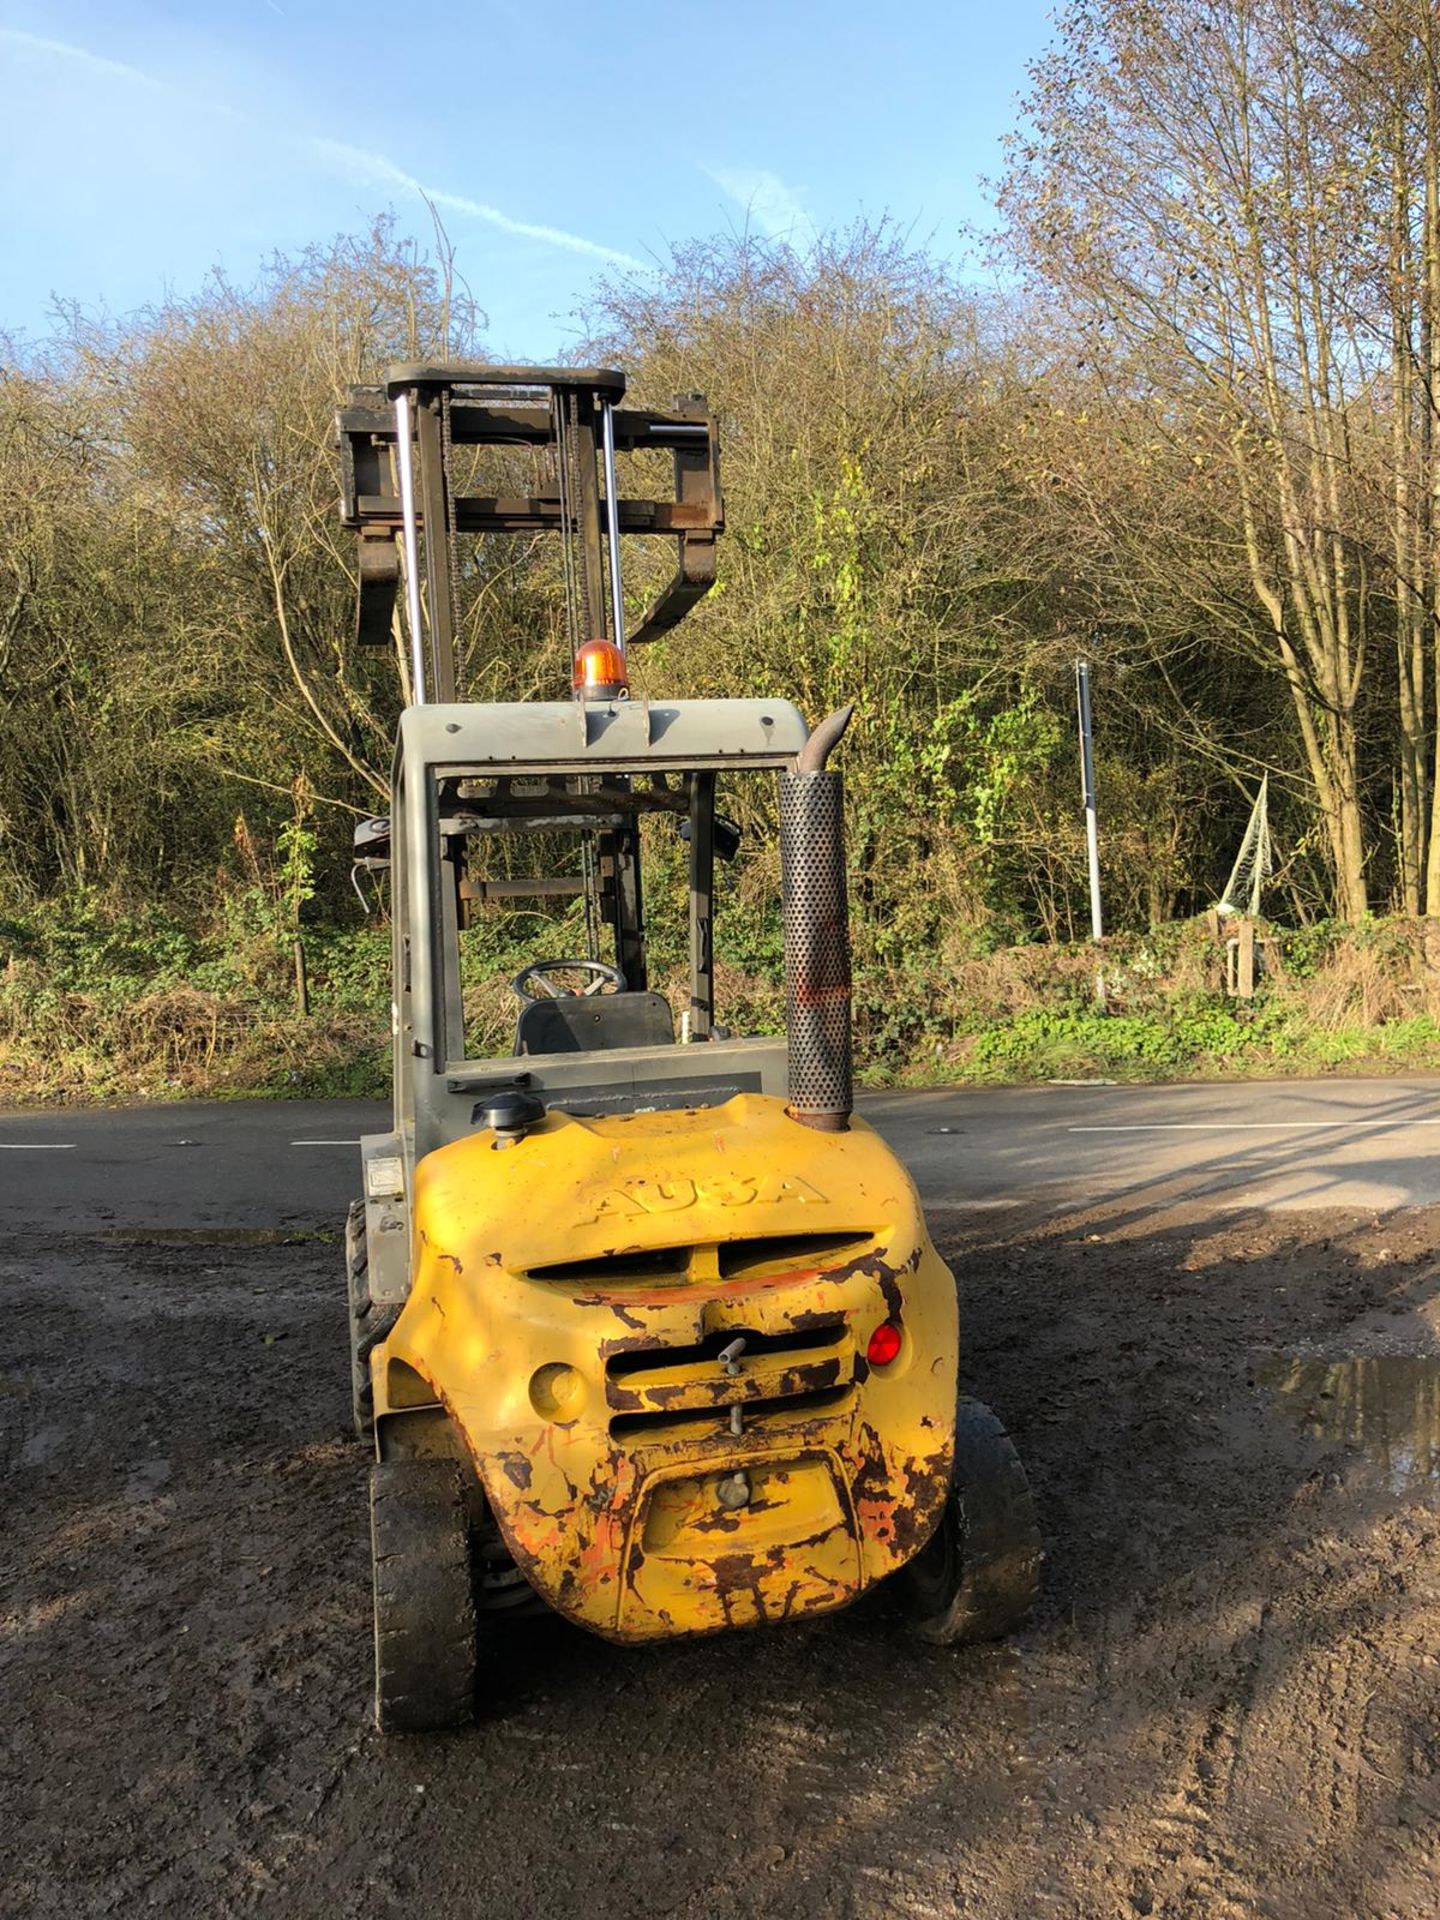 AUSA C150-H ROUGH TERRAIN FORKLIFT, YEAR 2006, RUNS, WORKS AND LIFTS *PLUS VAT* - Image 3 of 6